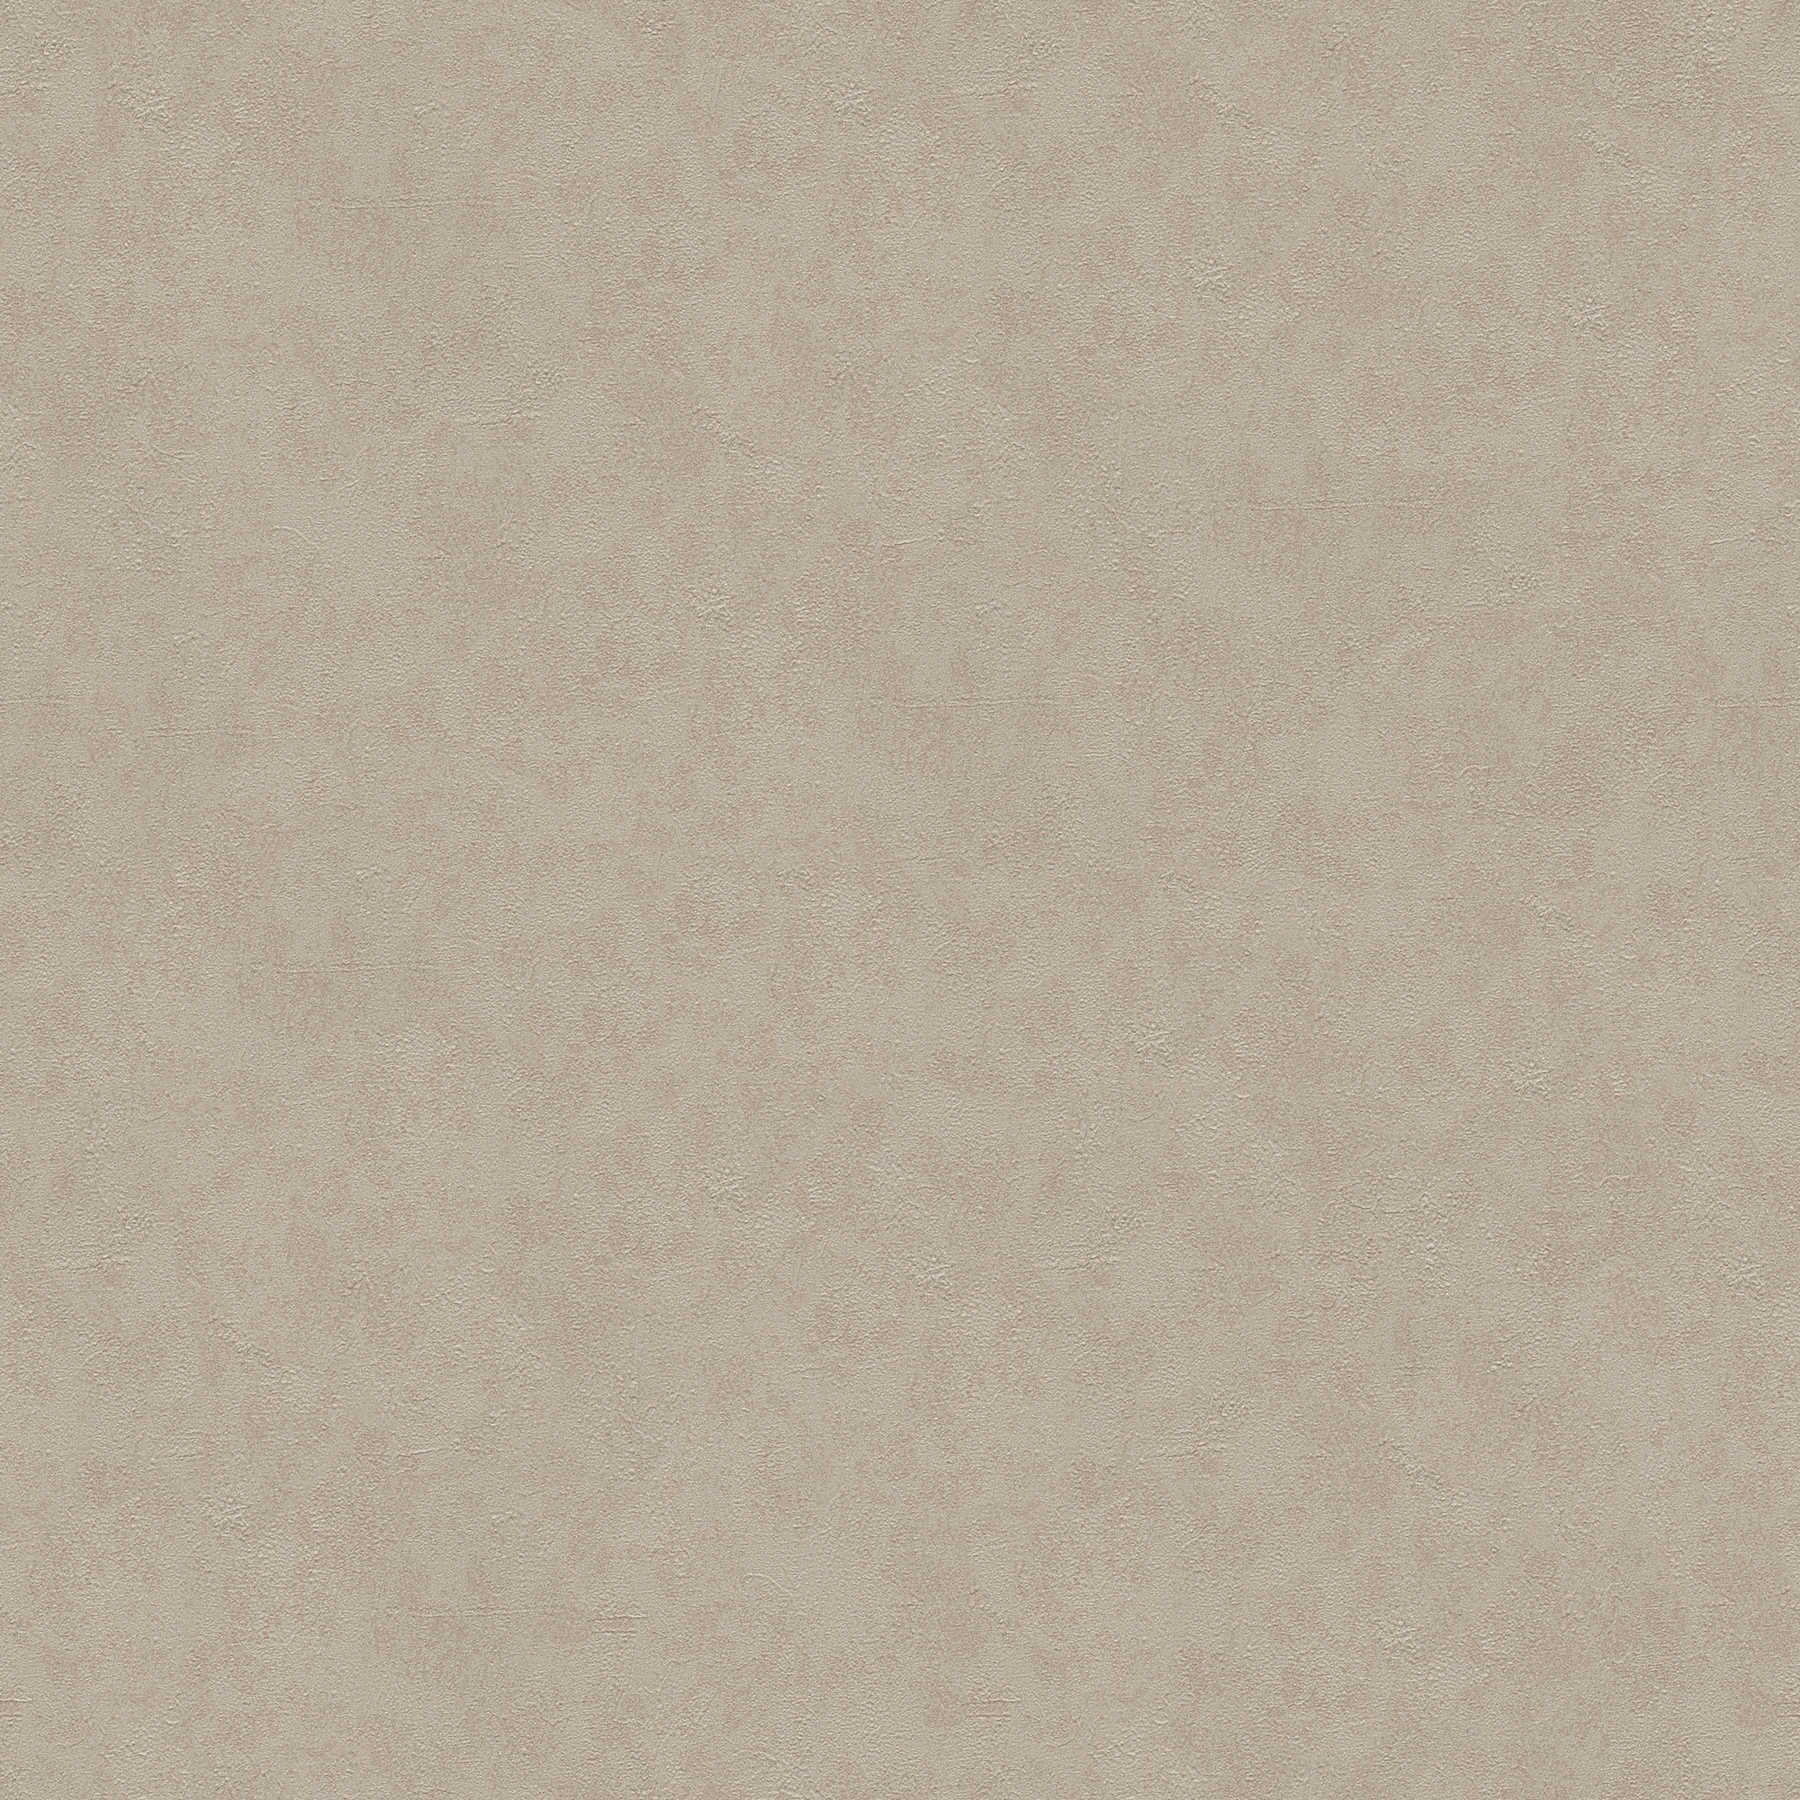 Plaster optics wallpaper natural tone with colour hatching - brown
